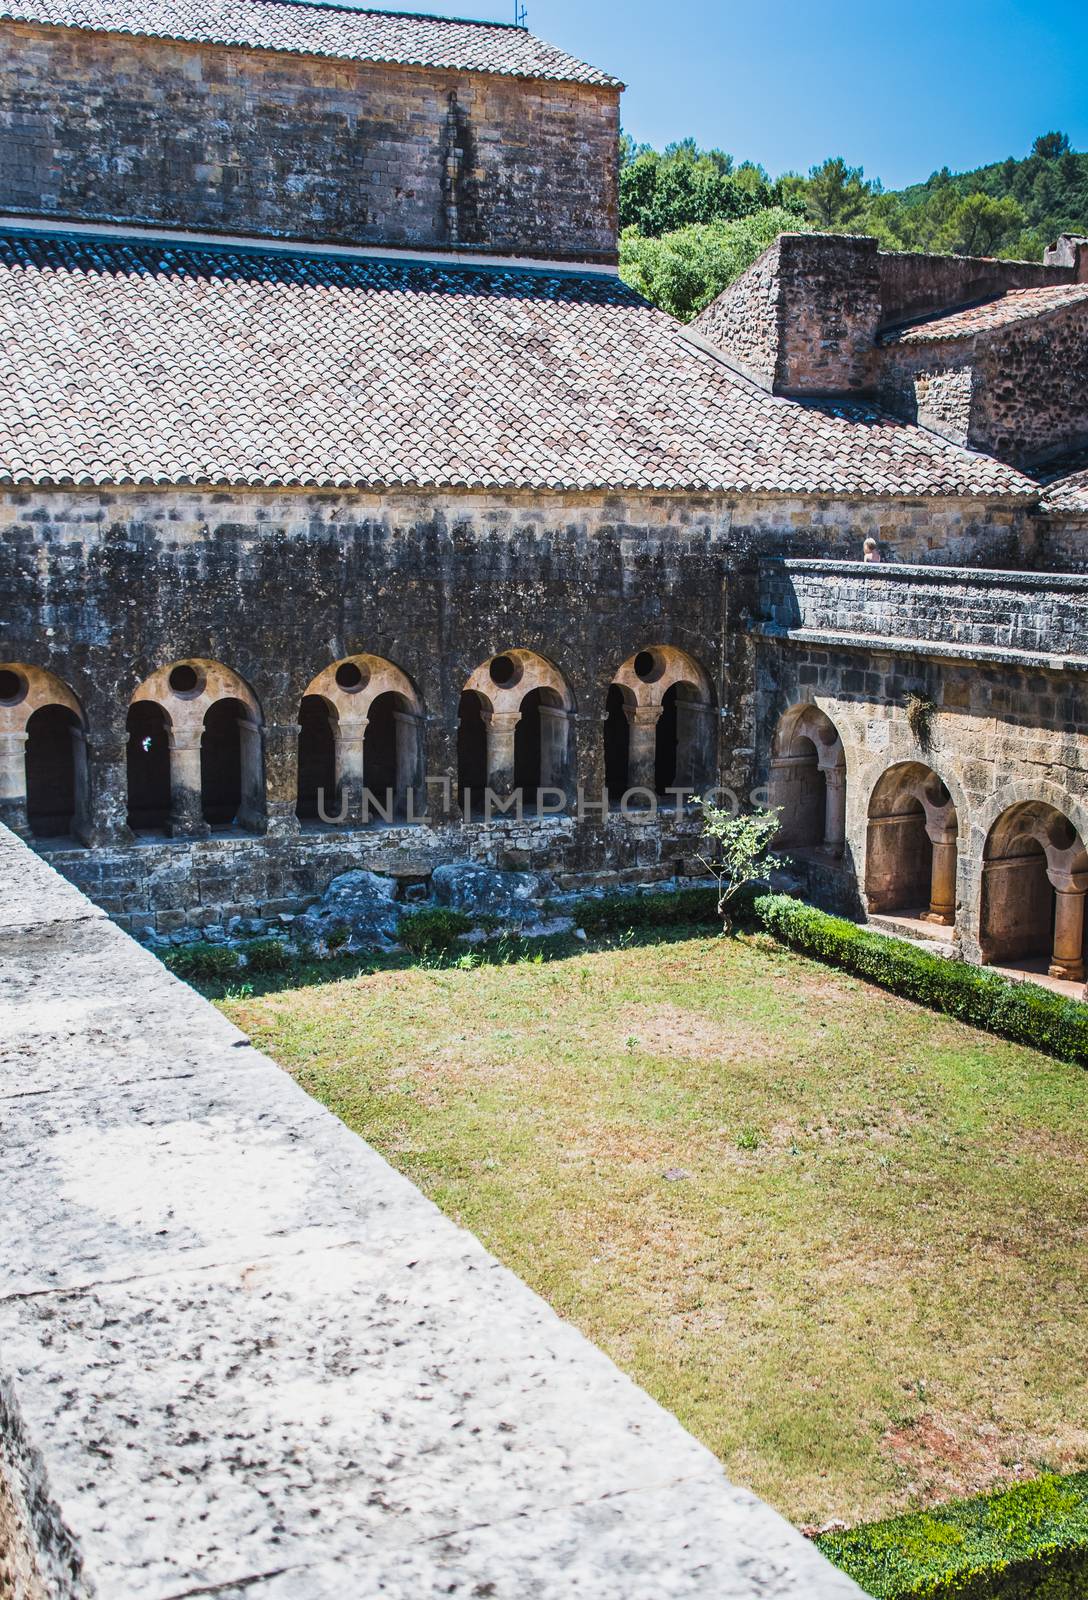 Cloister of the Thonoret abbey in the Var in France by raphtong